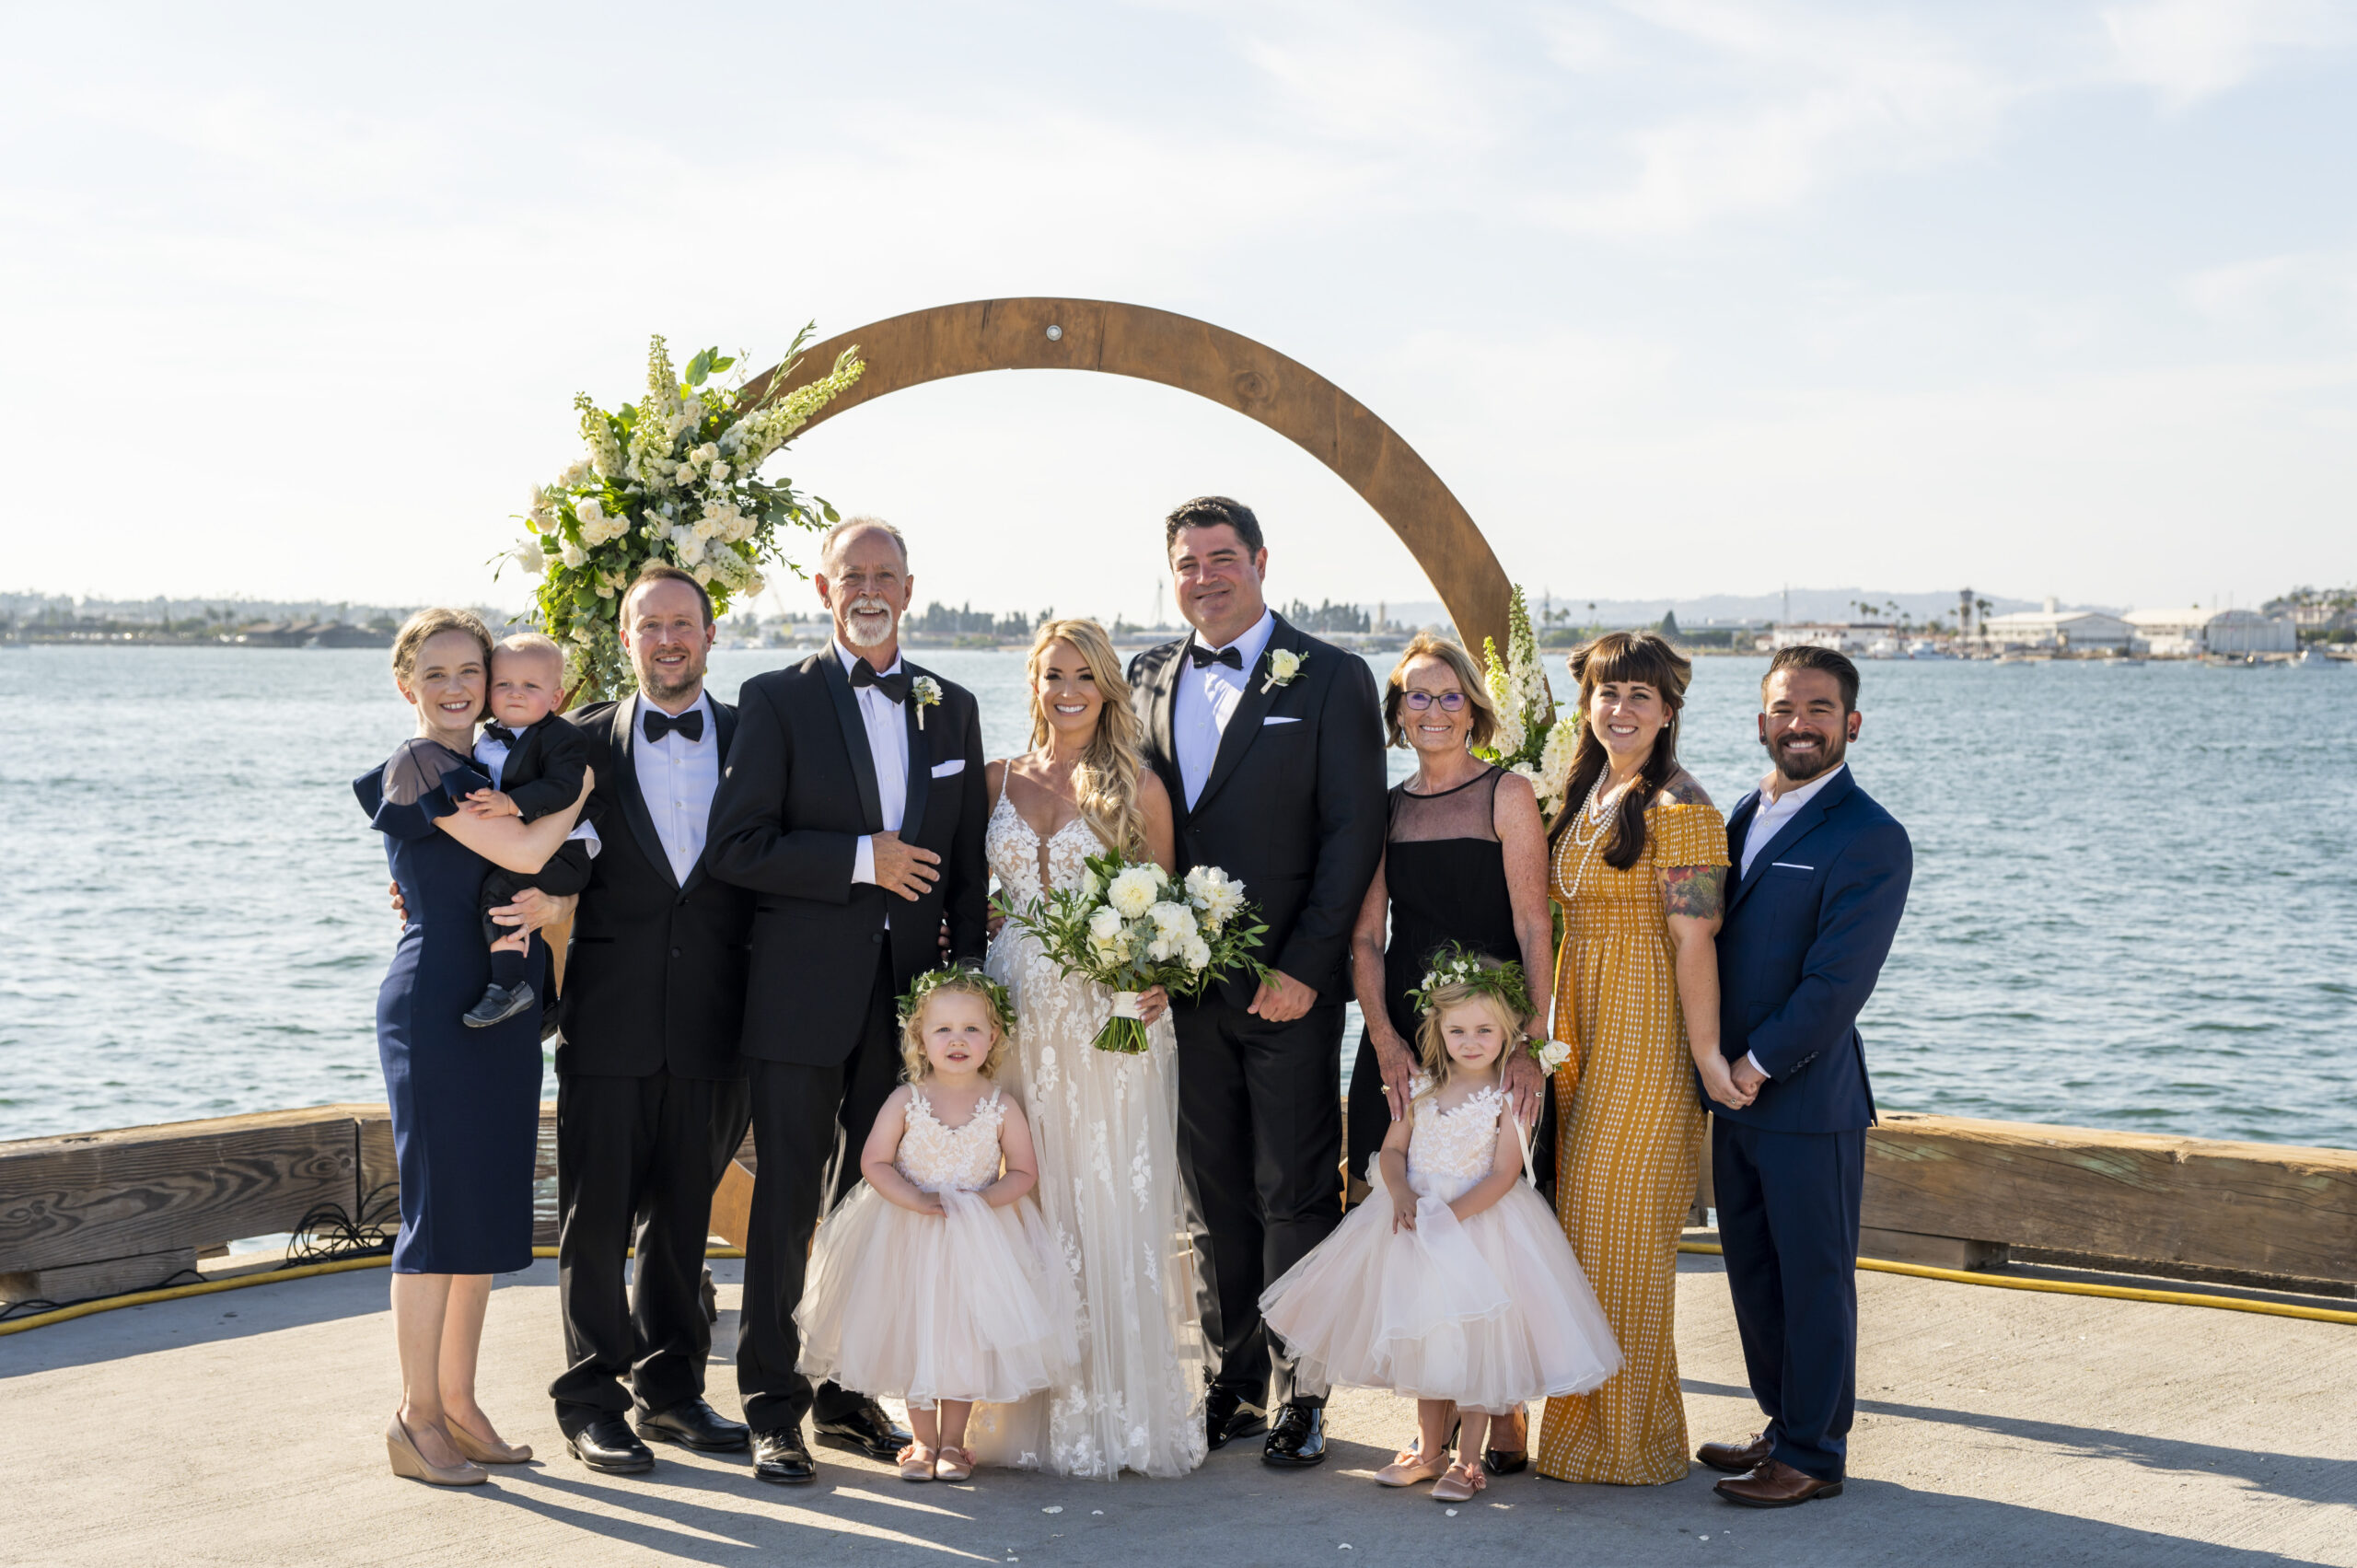 Whitney Bond with family at wedding ceremony in San Diego